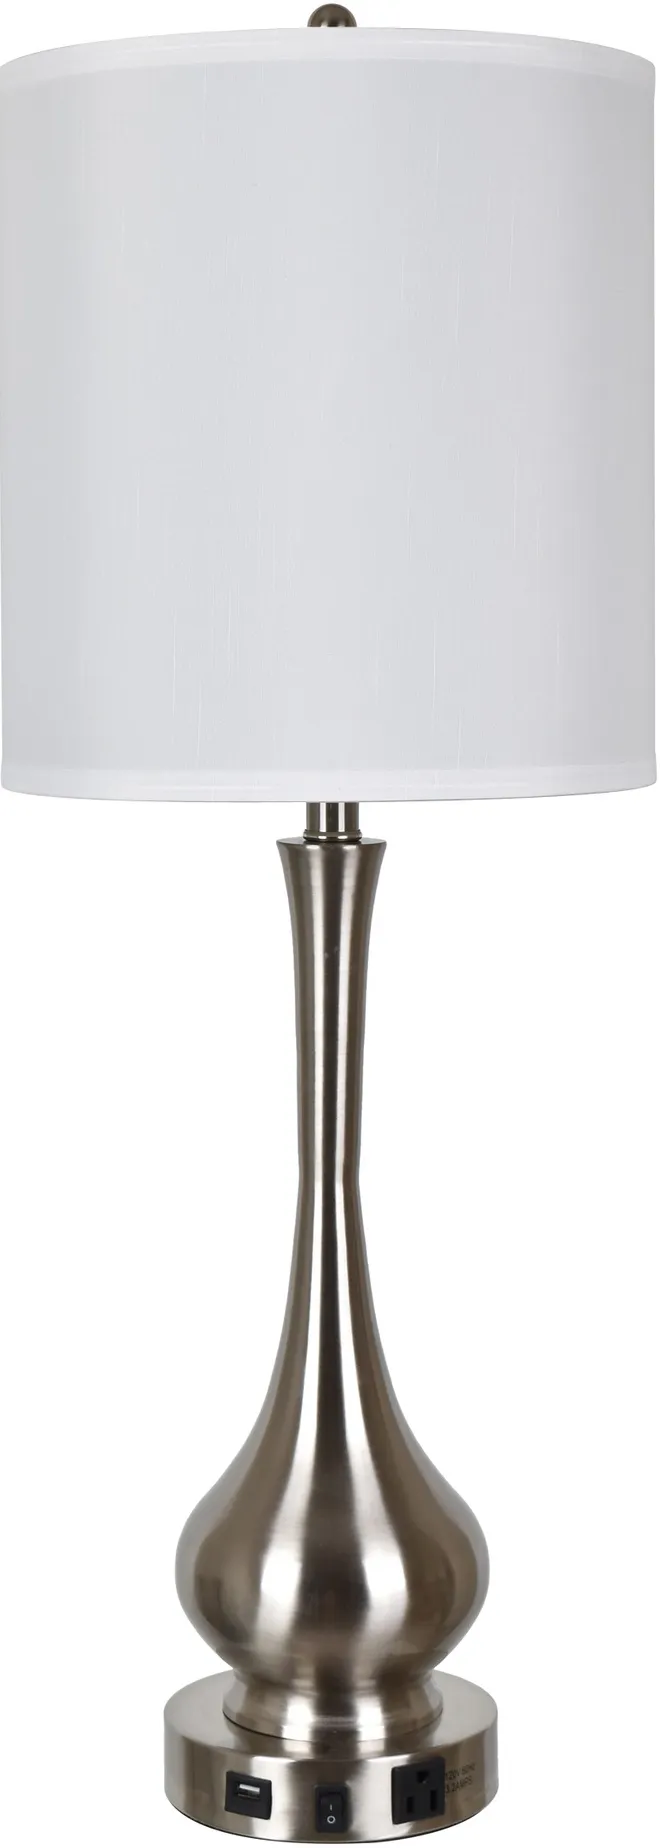 Crestview Collection Camden Brushed Nickel Table Lamp